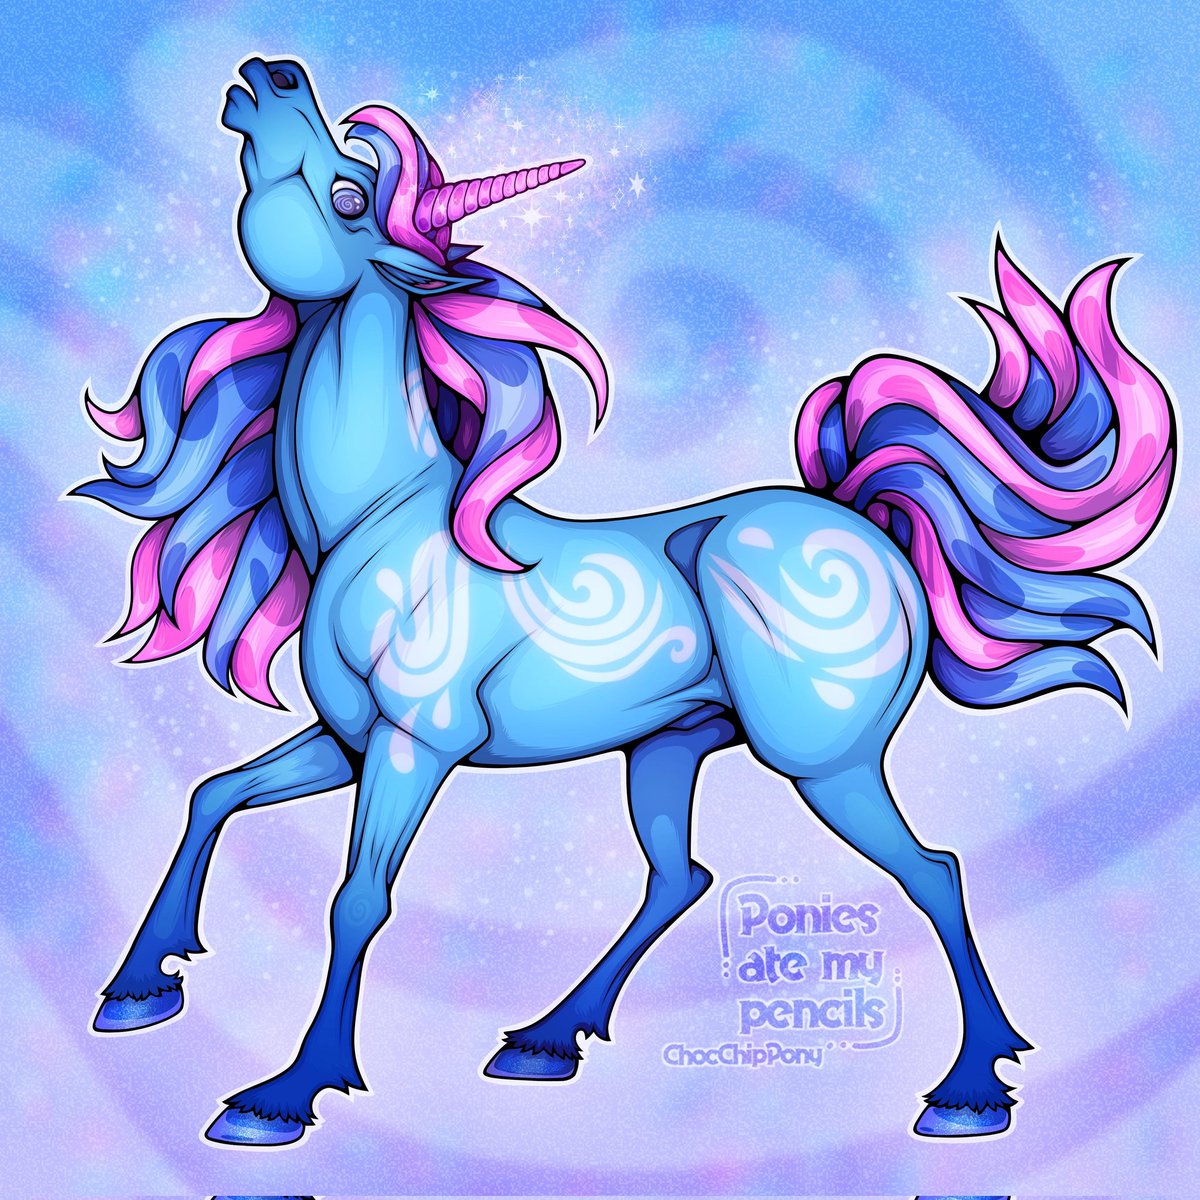 River will always be my favourite unicorn from Unicorn Academy